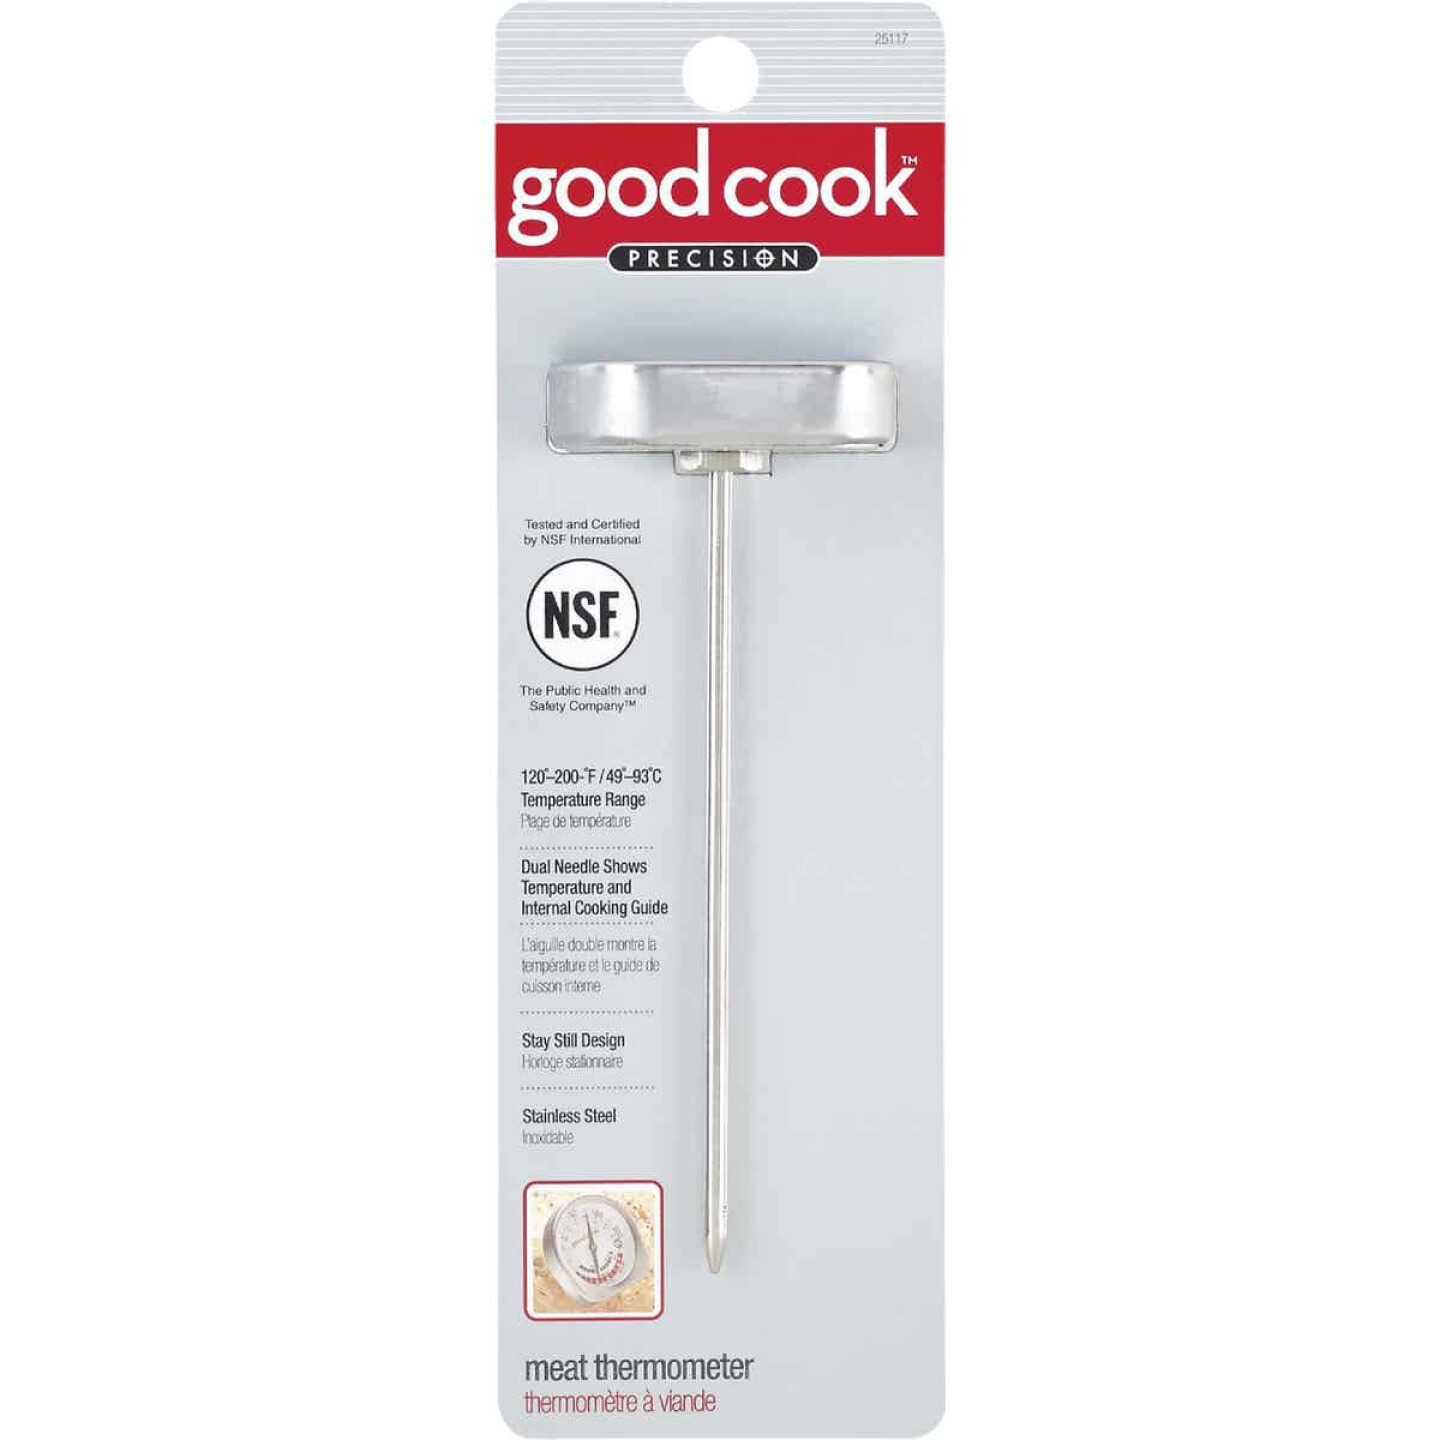 GoodCook Precision Candy and Deep Fry Thermometer with Storage